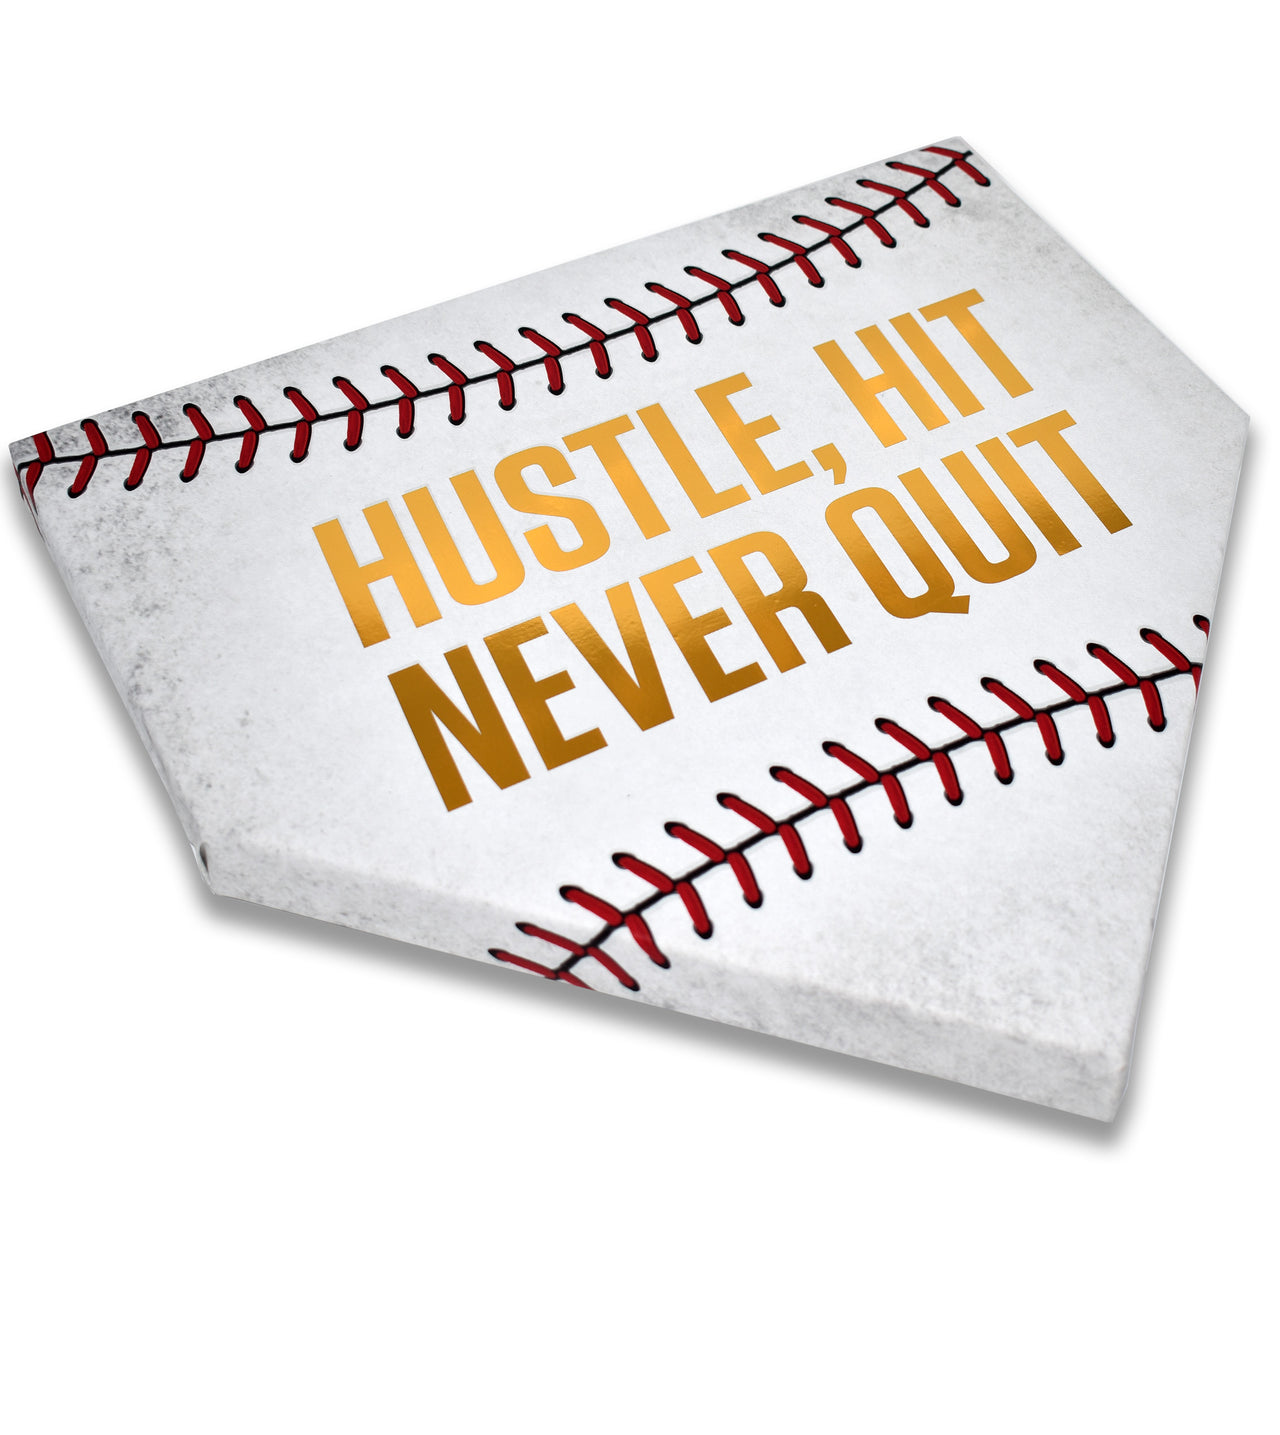 Coach Volleyball Hustle Hit Never Quit. Grunge Font 